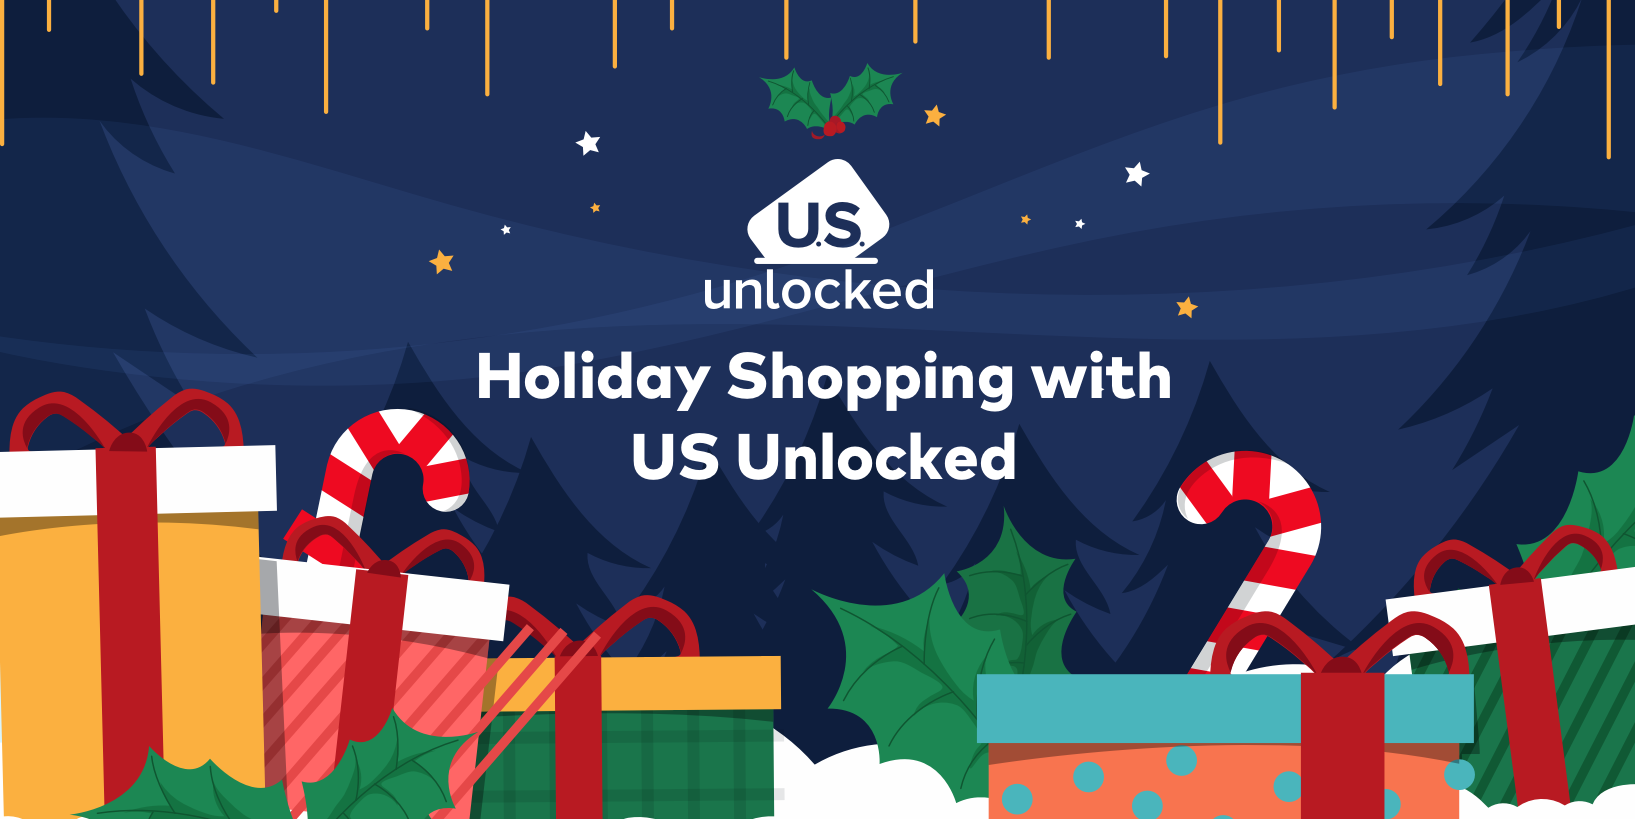 Holiday Shopping Tips with US Unlocked